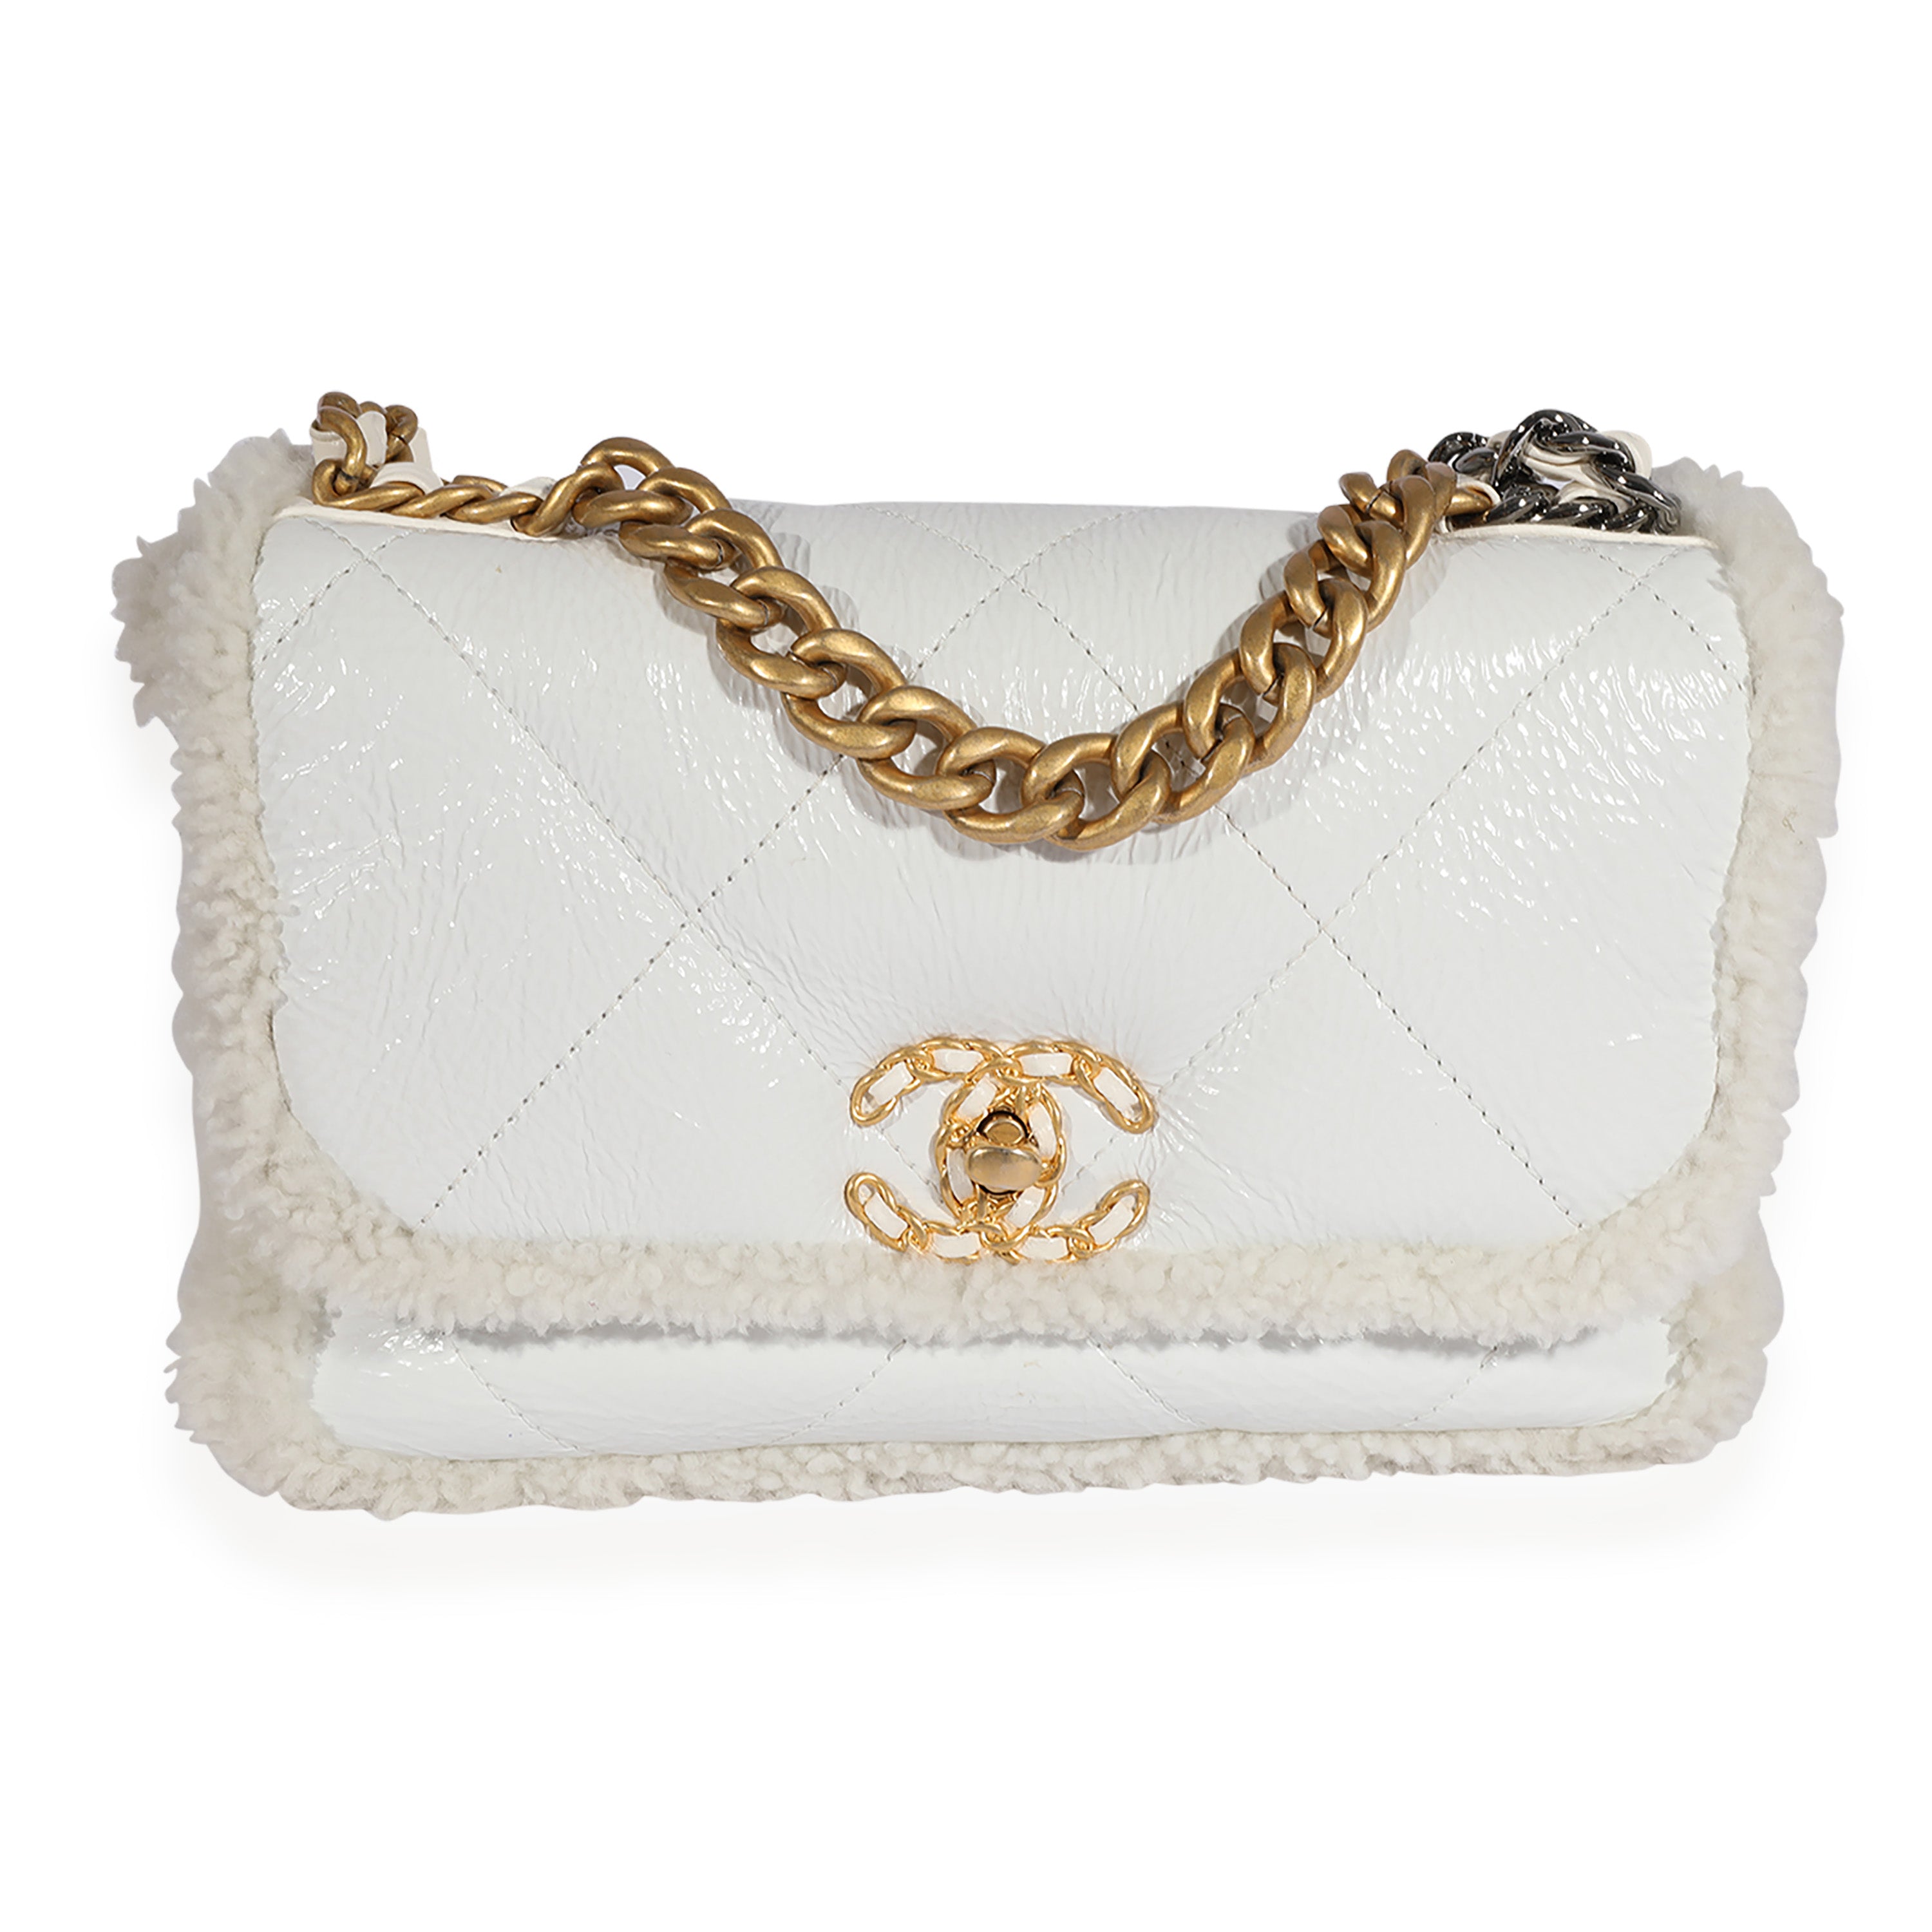 Chanel 19 Large Flap Quilted Leather Shoulder Bag White (2019)